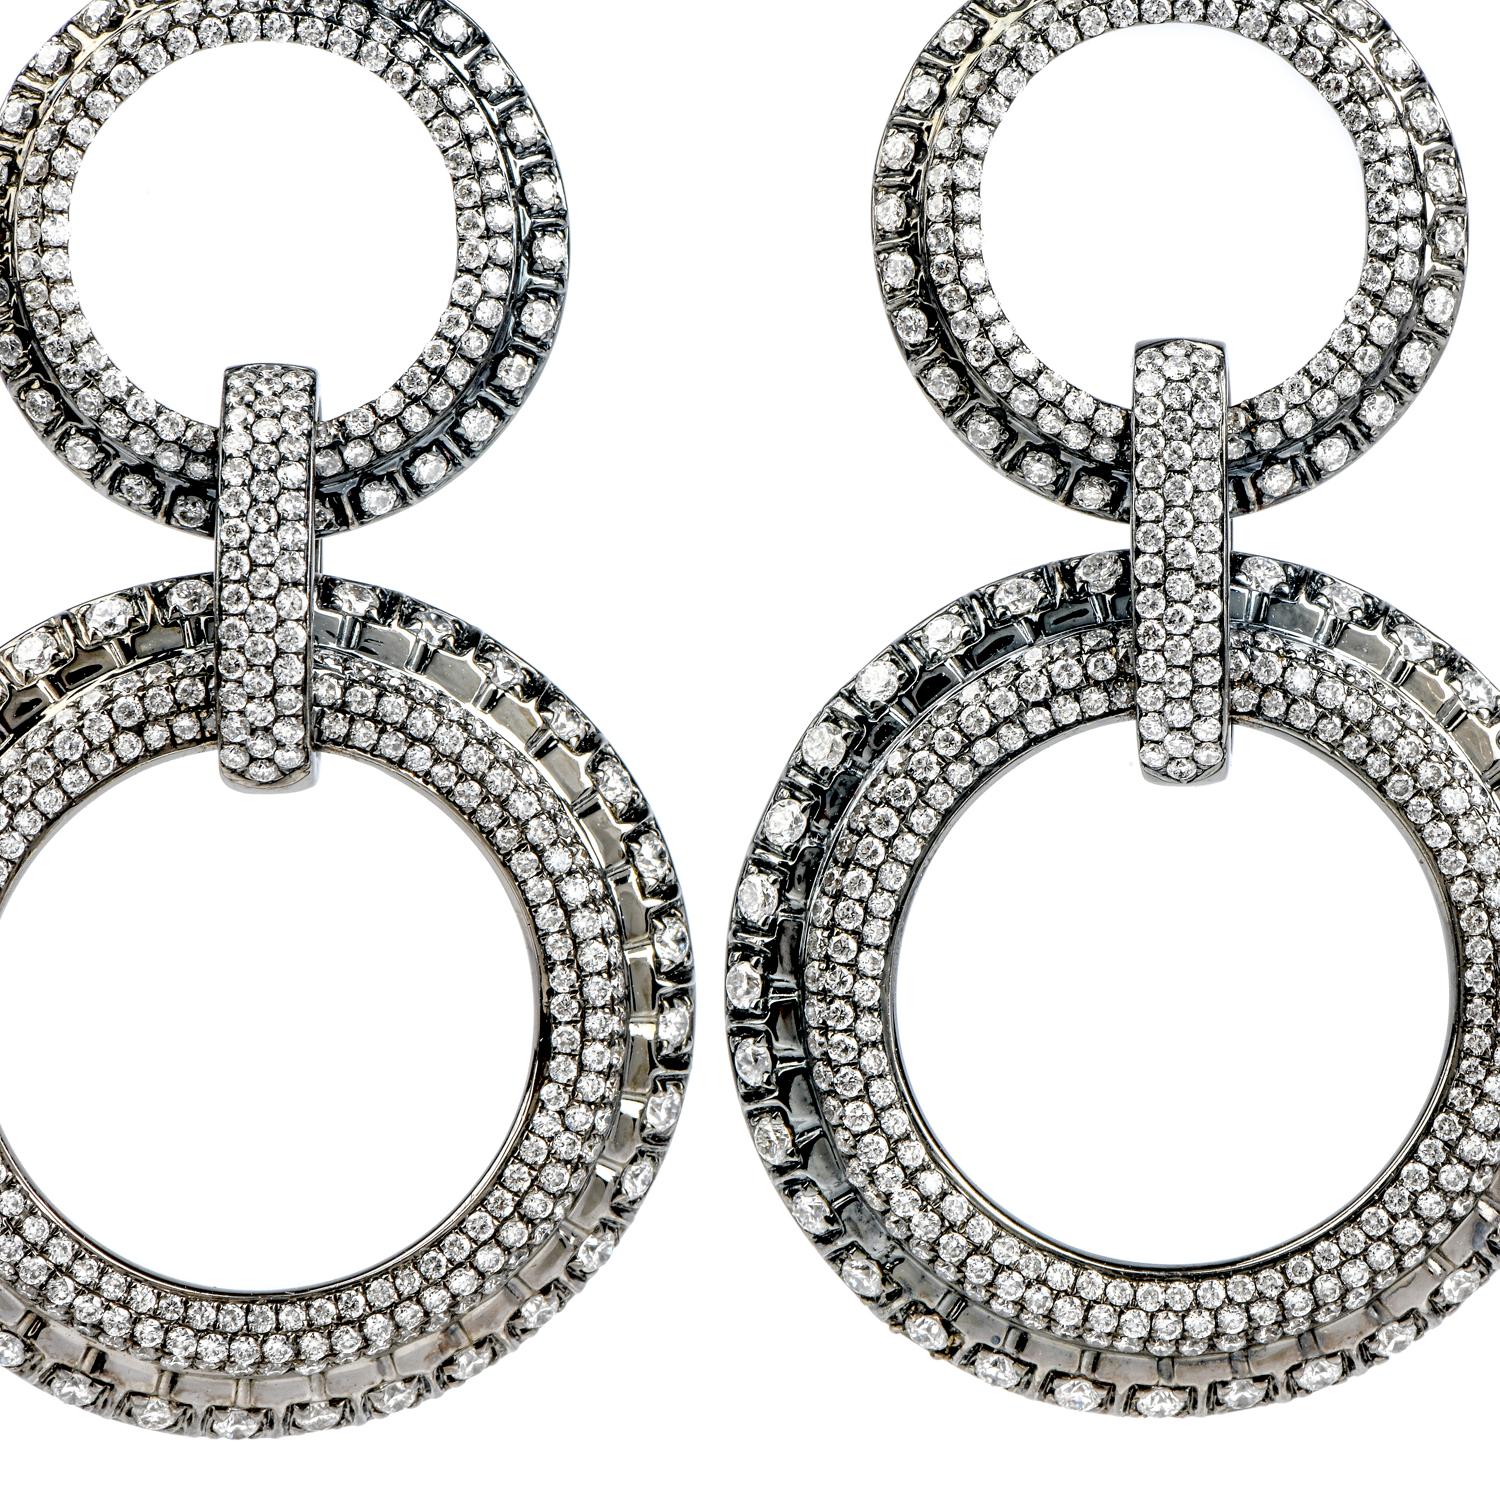 Dance the night away in this trending Estate Diamond 18K Gold triple Circle Dangle Drop Earrings!  These earrings are crafted in 18-karat white gold with fashionable black rhodium plating.  

There are various sparkling genuine diamonds, round cut,